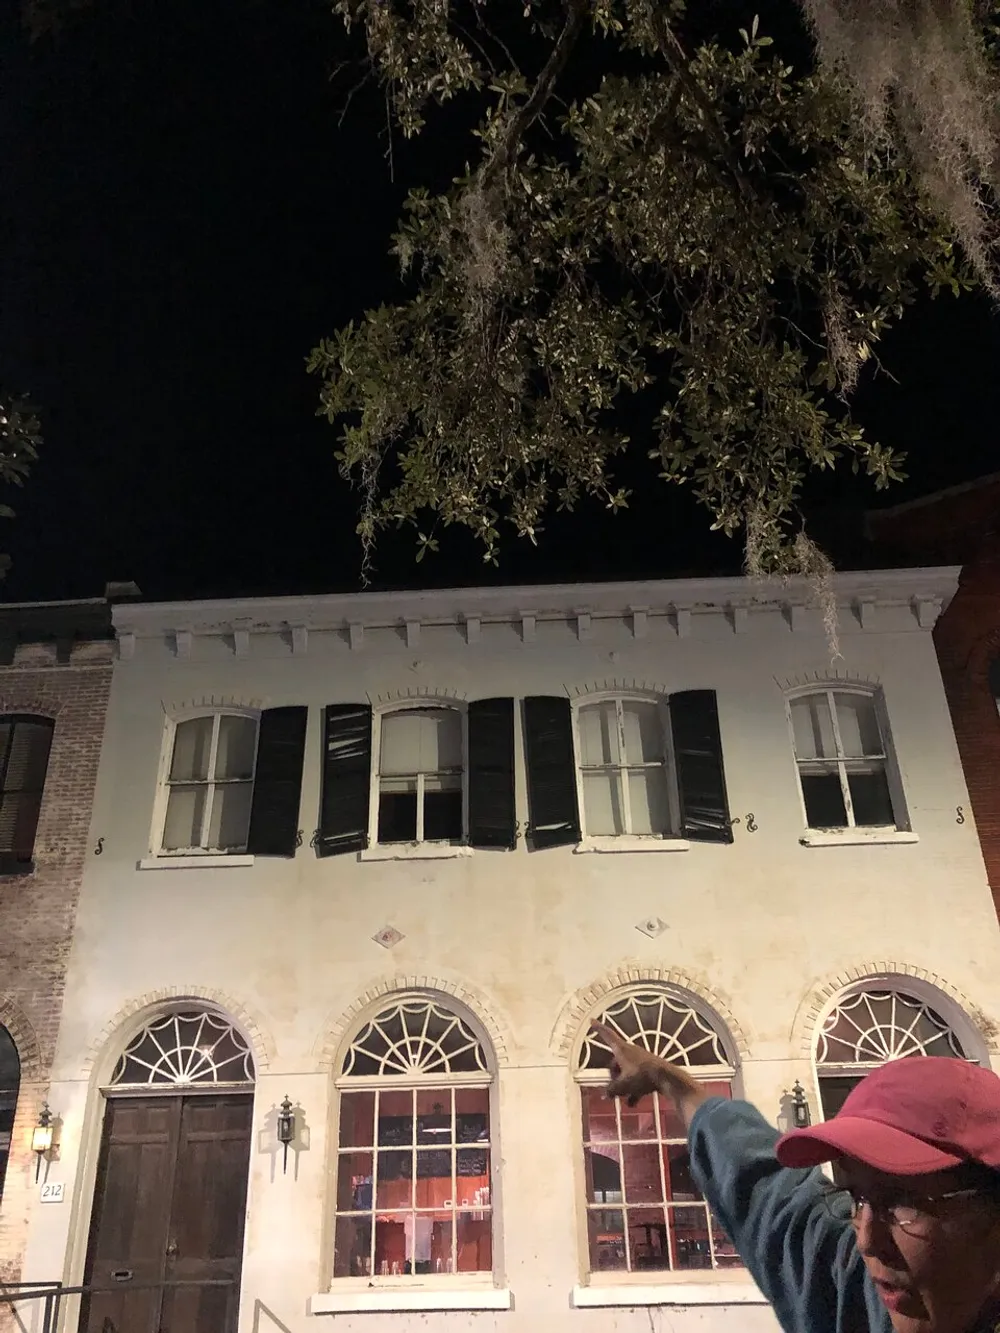 A person in a red hat is gesturing towards a two-story building with black shutters at night under a tree with hanging Spanish moss